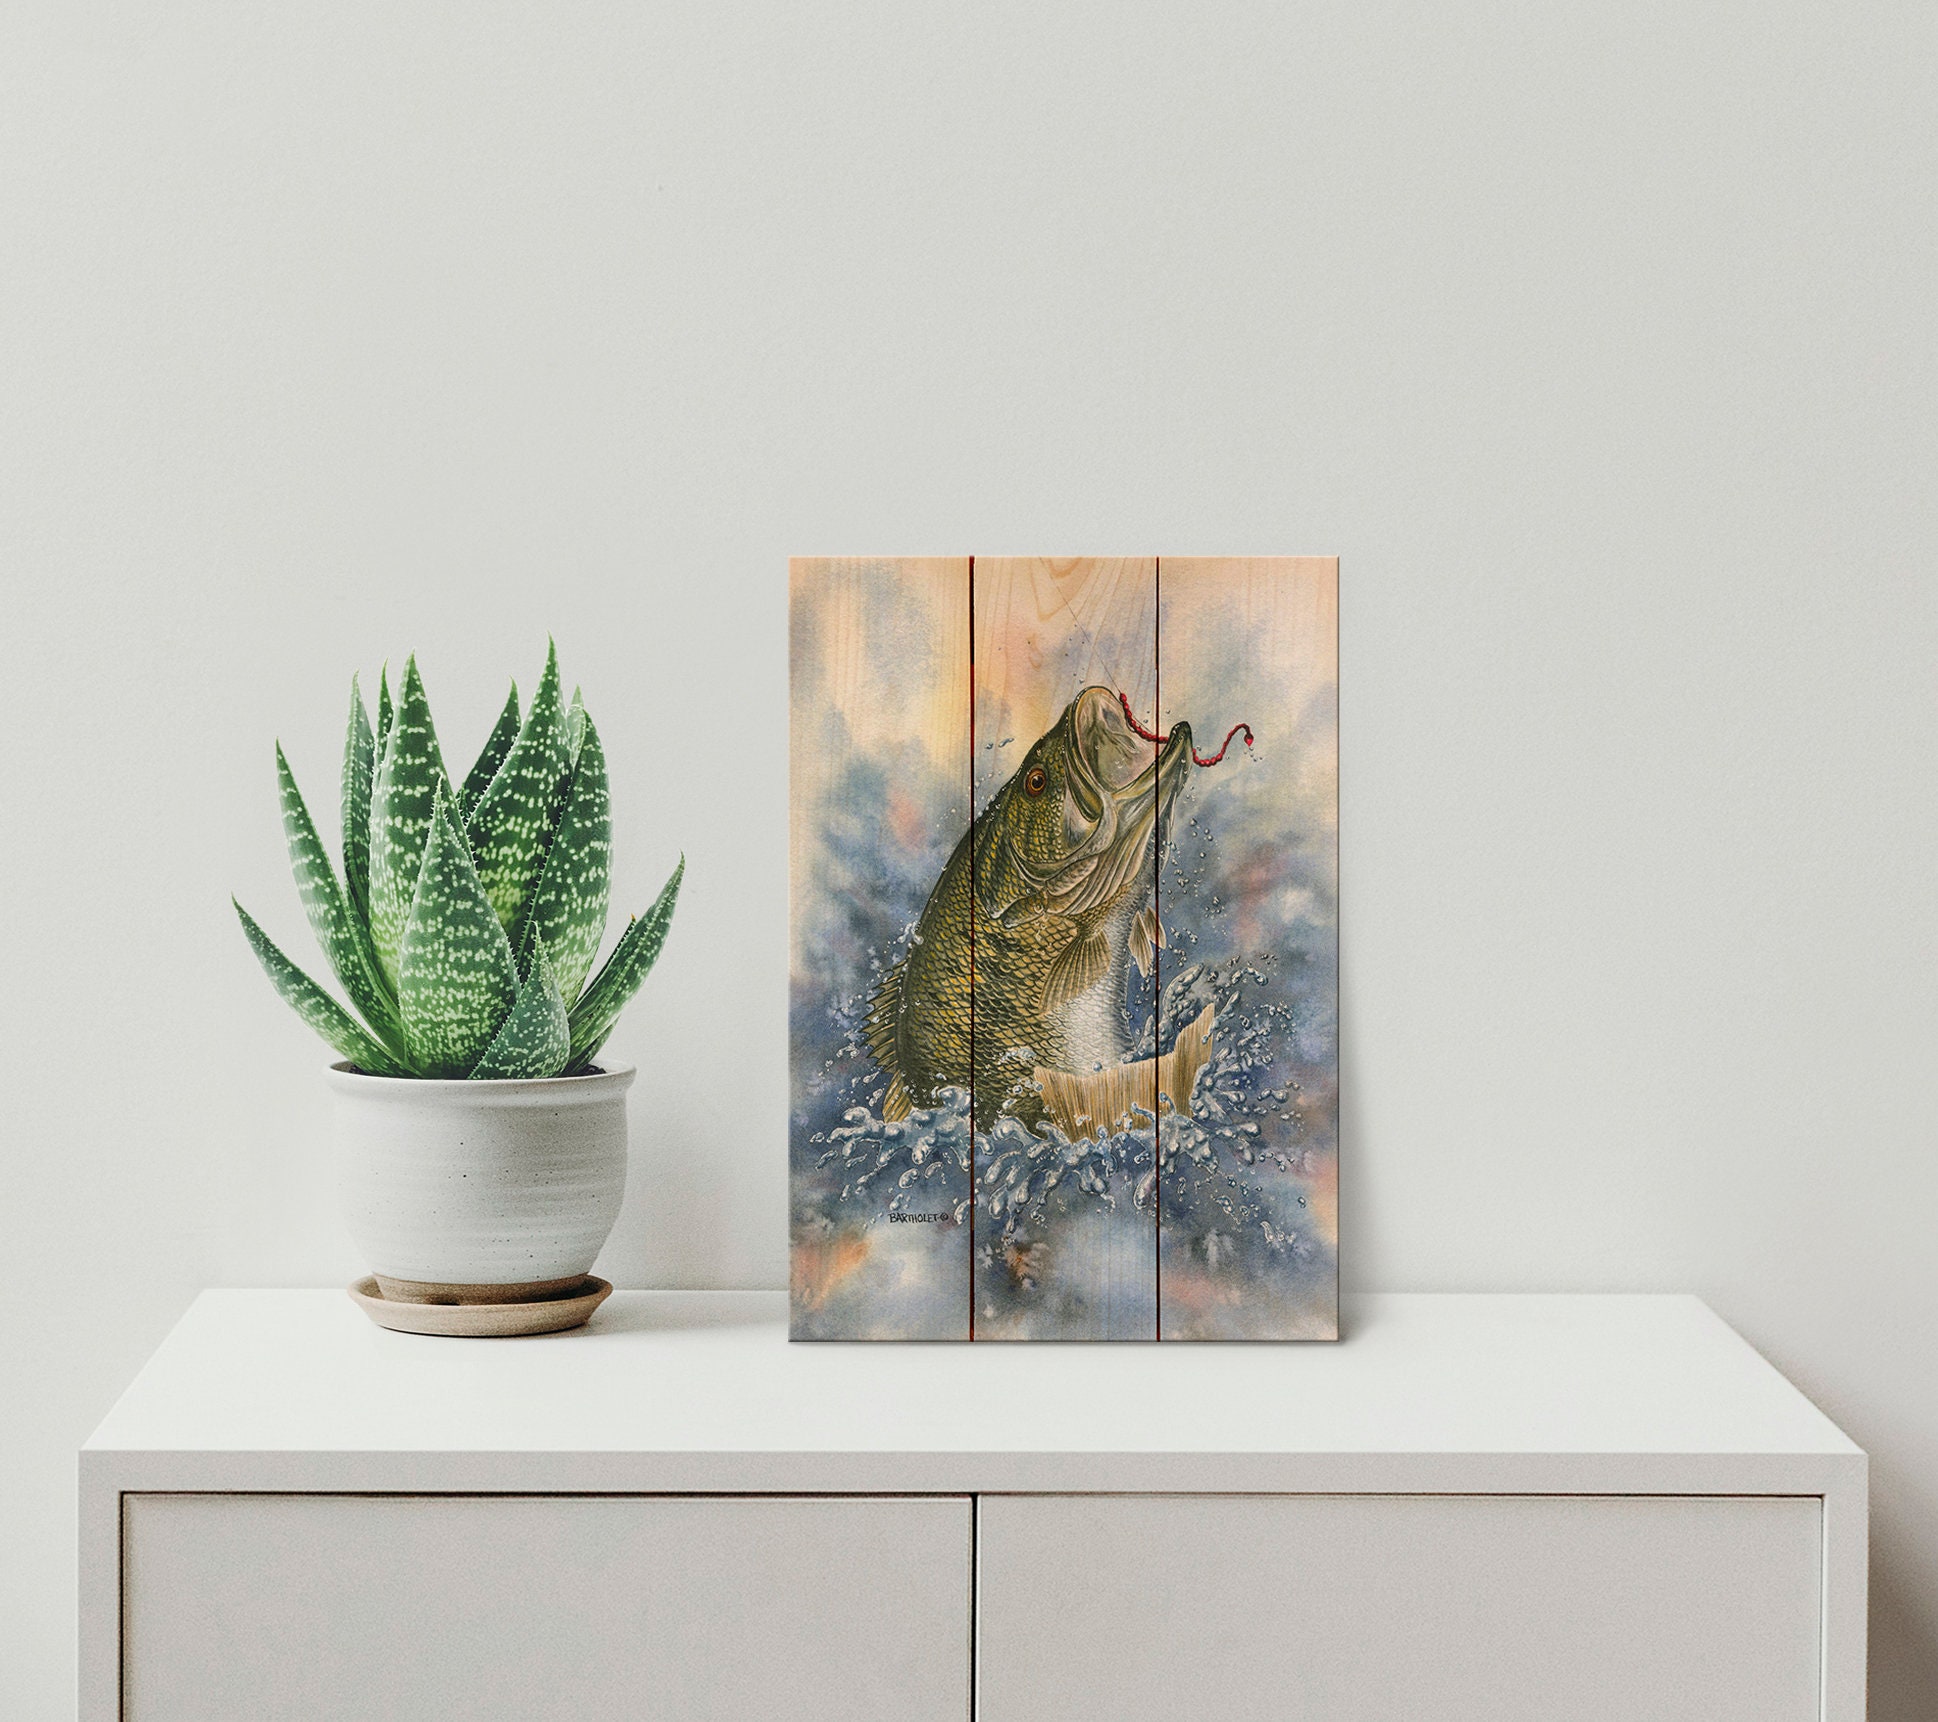 Buy Bucket Mouth Wall Art Print on Wood Fishing Home Decor Watercolor Bass  Wall Hanging Poster Online in India 